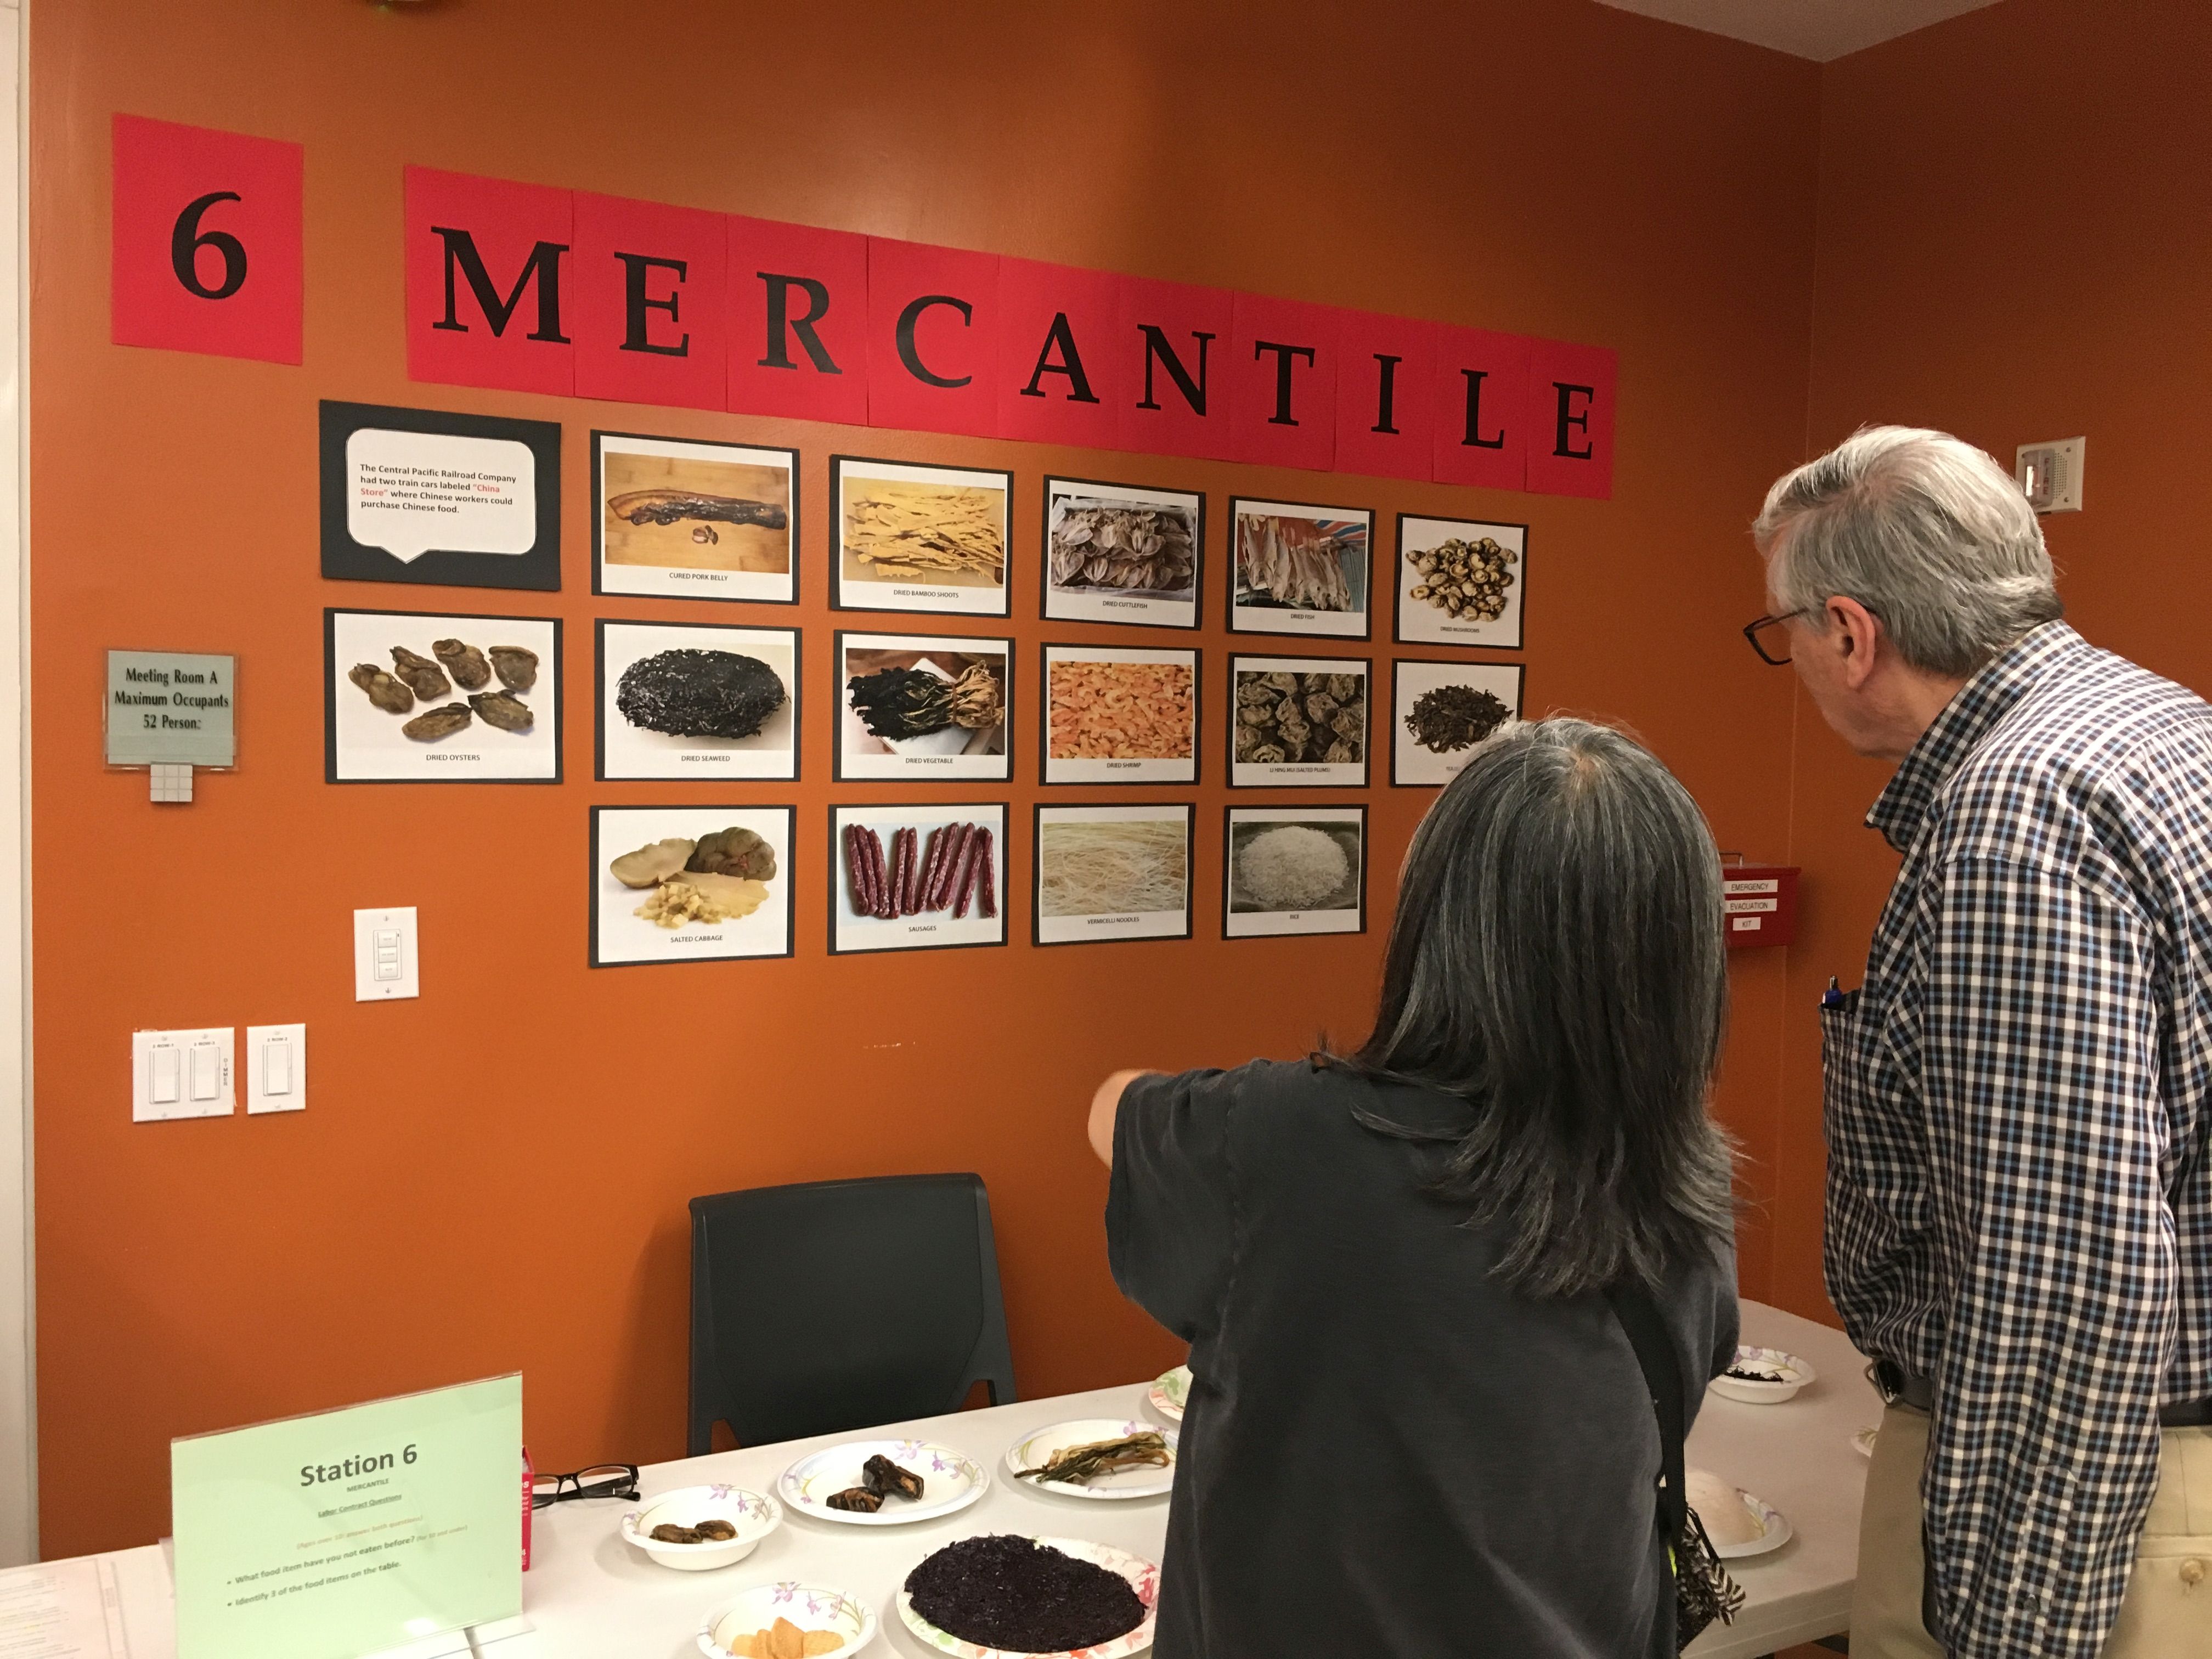 Two adults look at the Mercantile wall